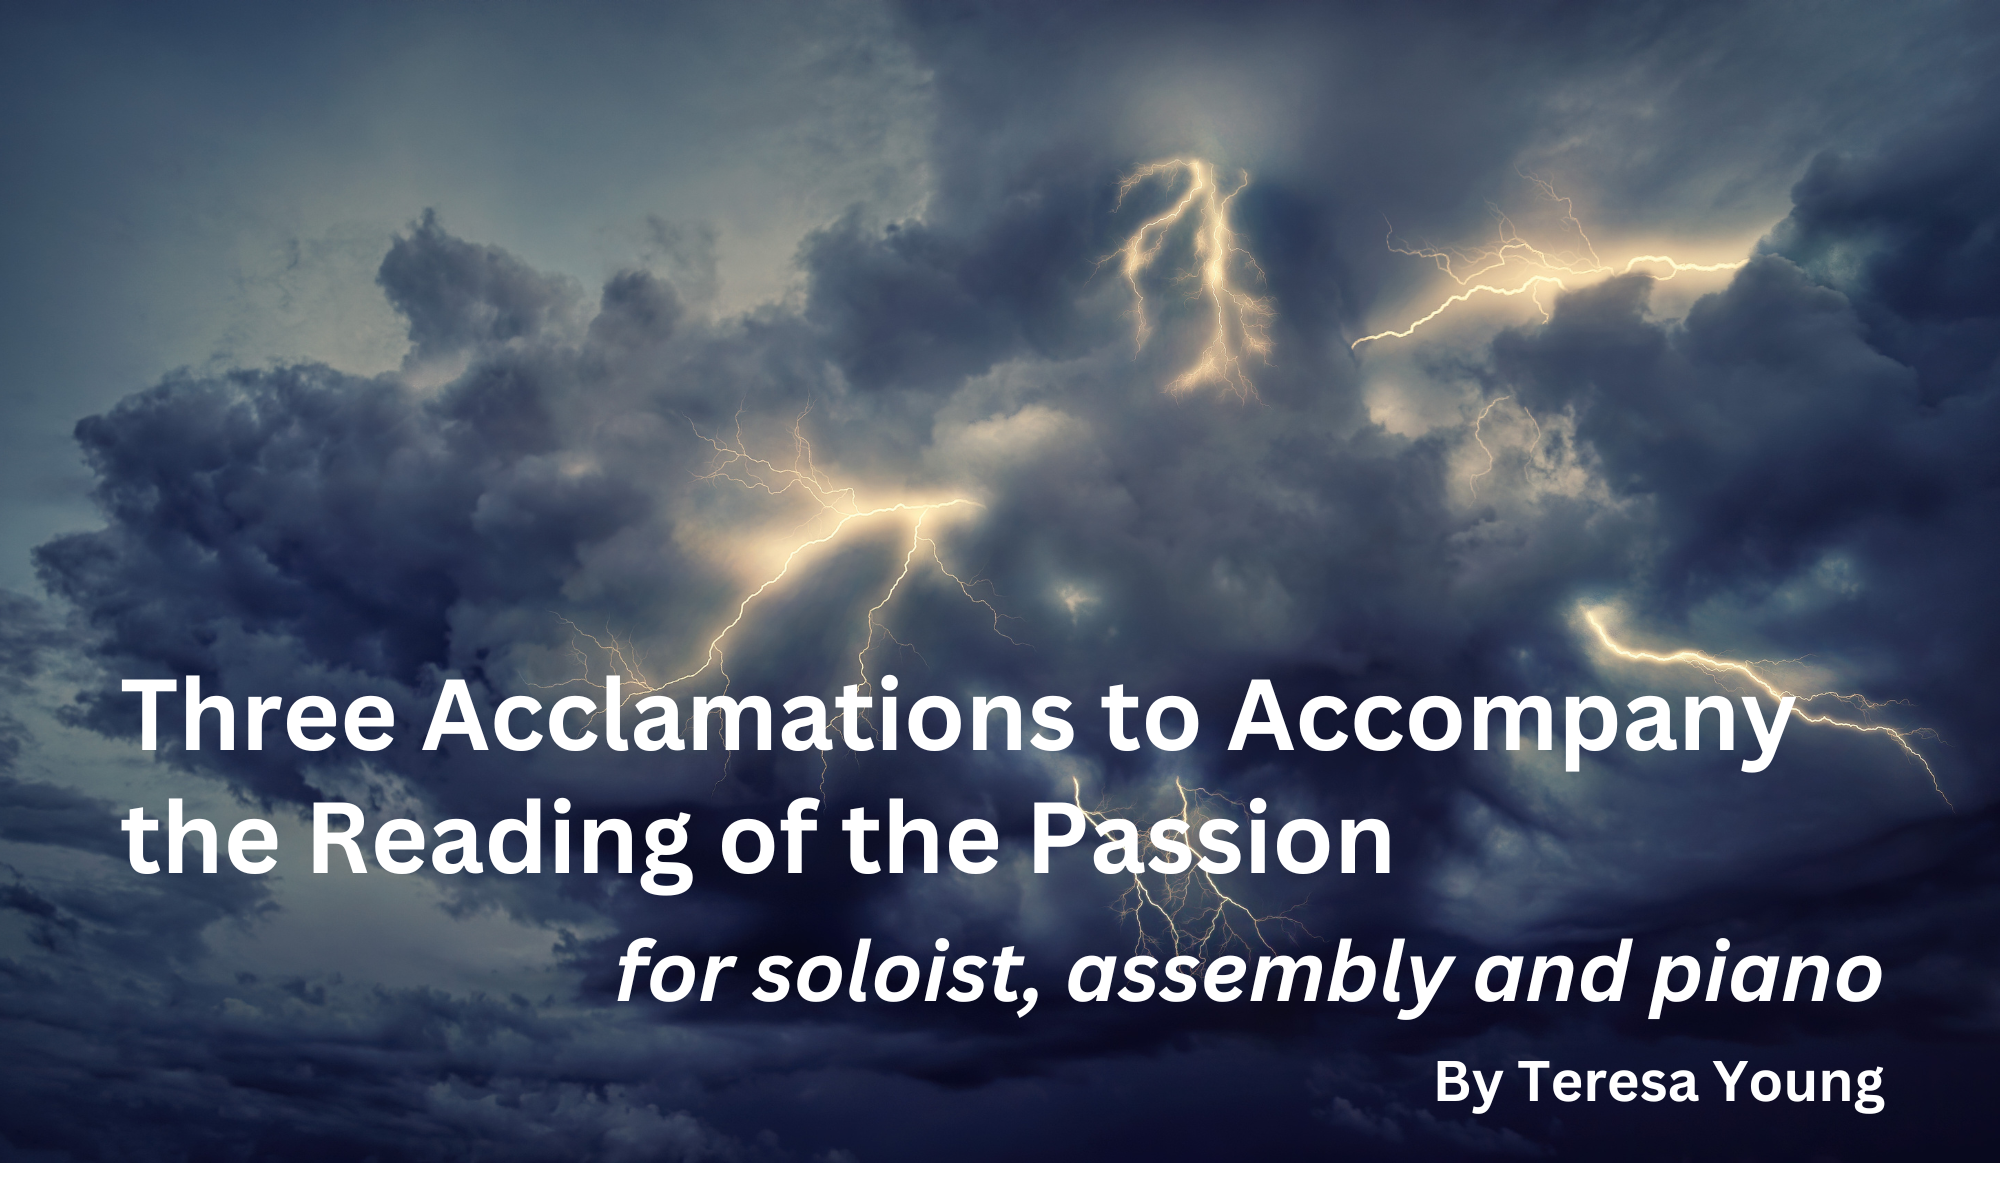 Three Acclamations to Accompany the Reading of the Passion, by Teresa Young